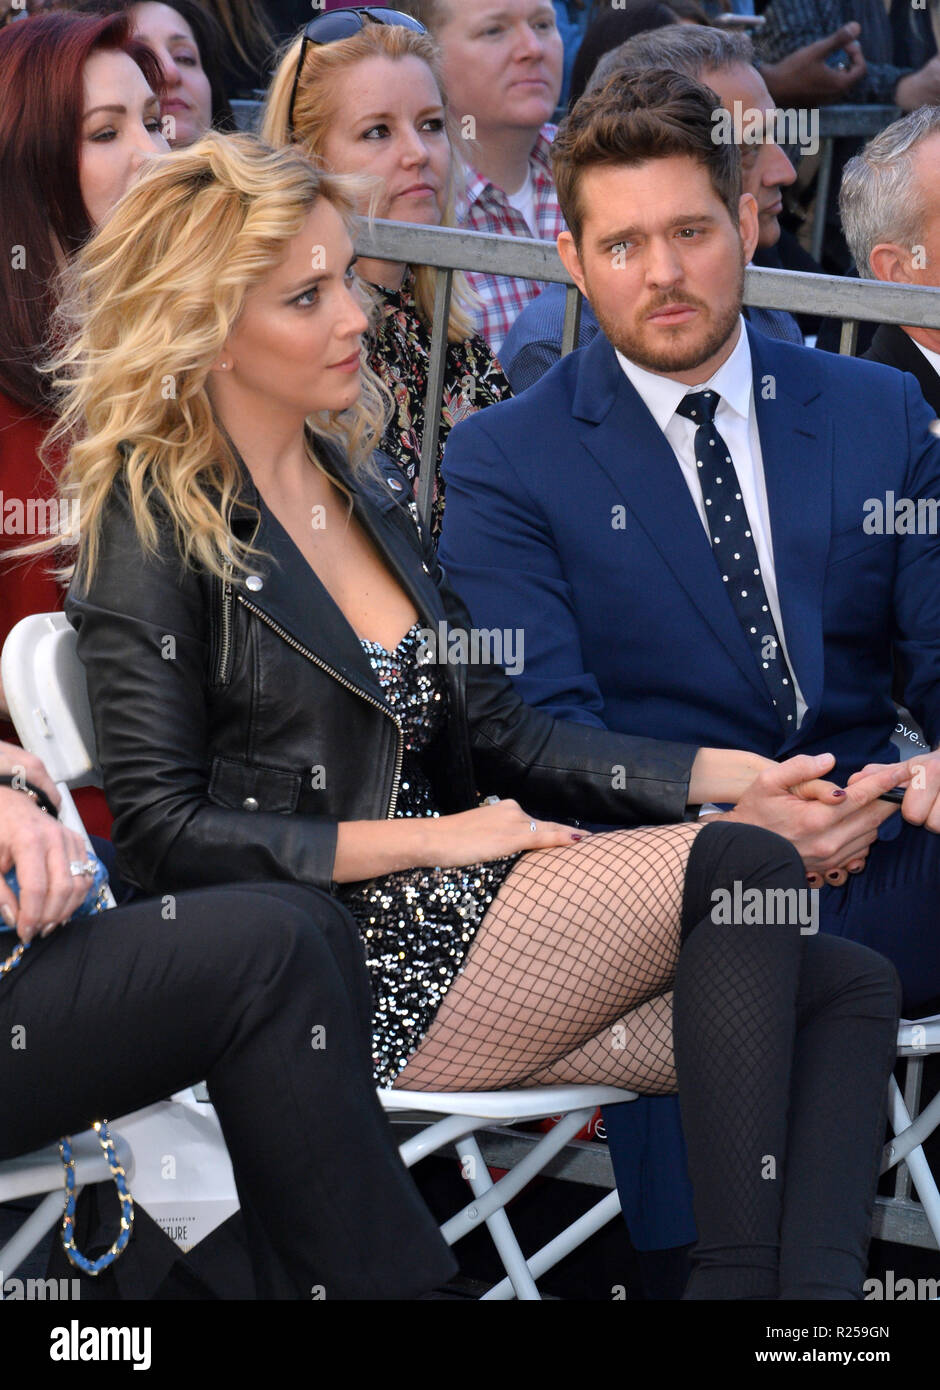 LOS ANGELES, CA. November 16, 2018: Michael Buble & Luisana Lopilato at the Hollywood Walk of Fame Star Ceremony honoring singer Michael Bublé. Pictures: Paul Smith/Featureflash Credit: Paul Smith/Alamy Live News Stock Photo